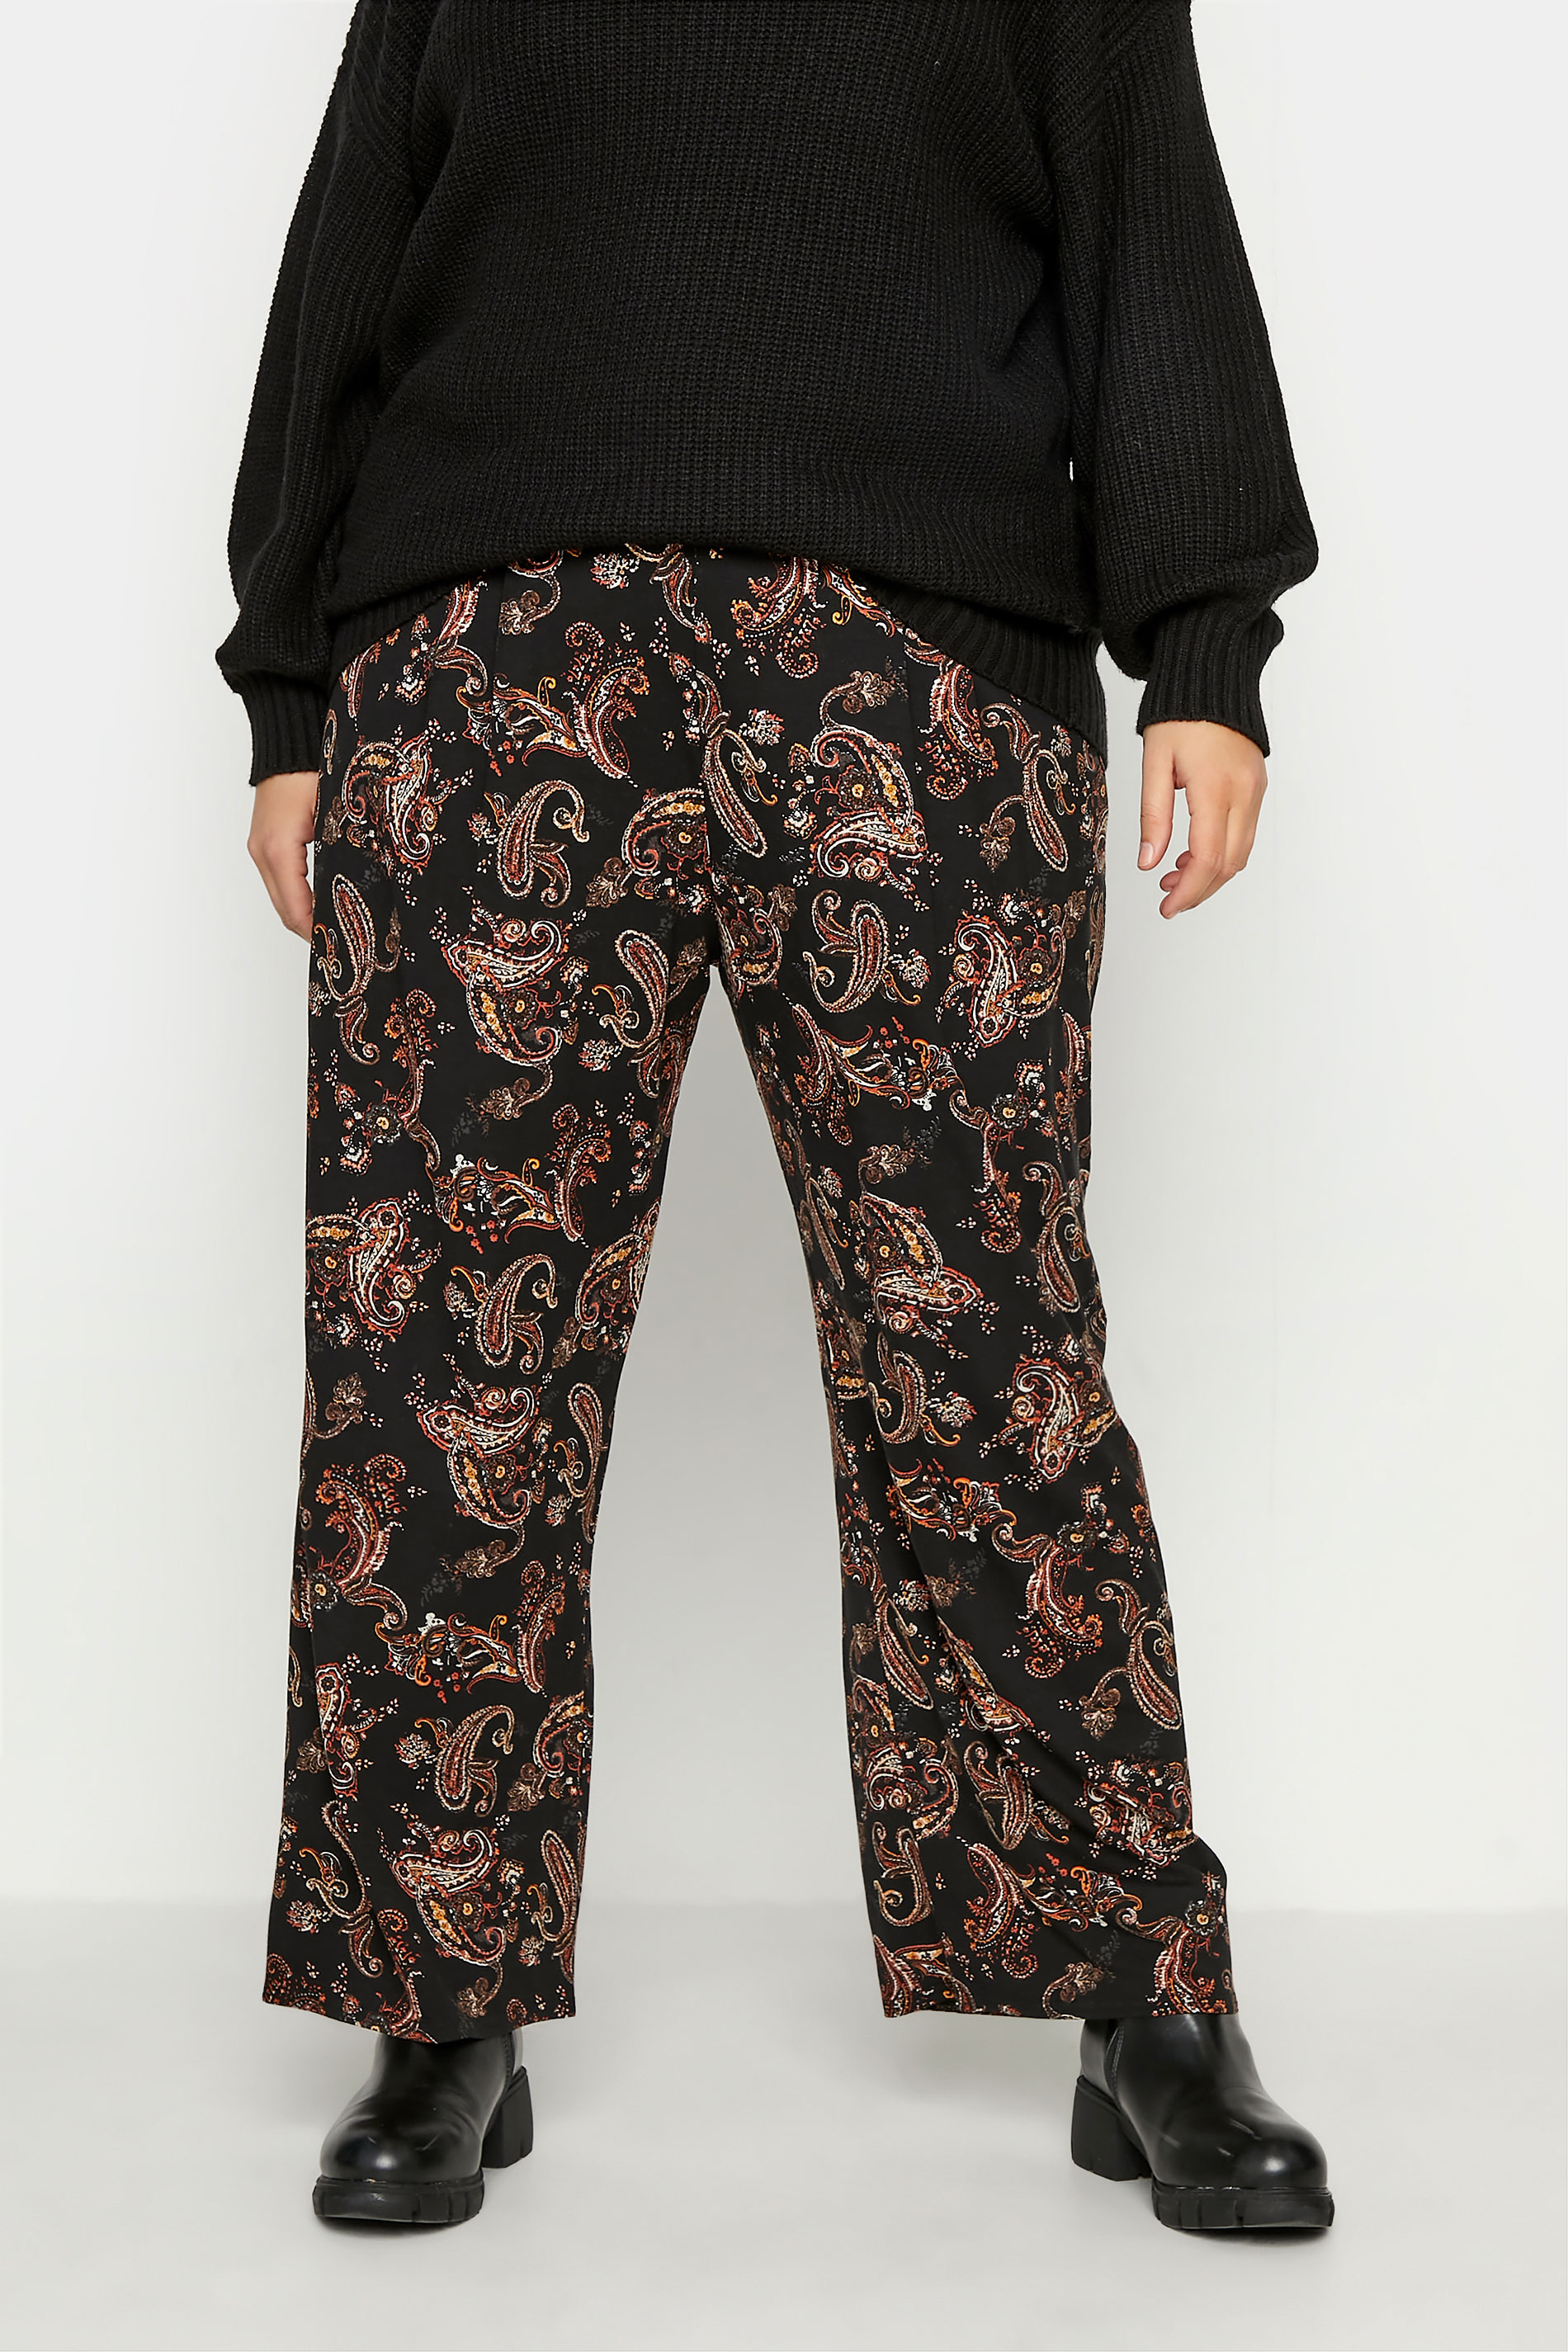 LIMITED COLLECTION Black Paisley Print Pleated Wide Leg Trousers_A.jpg